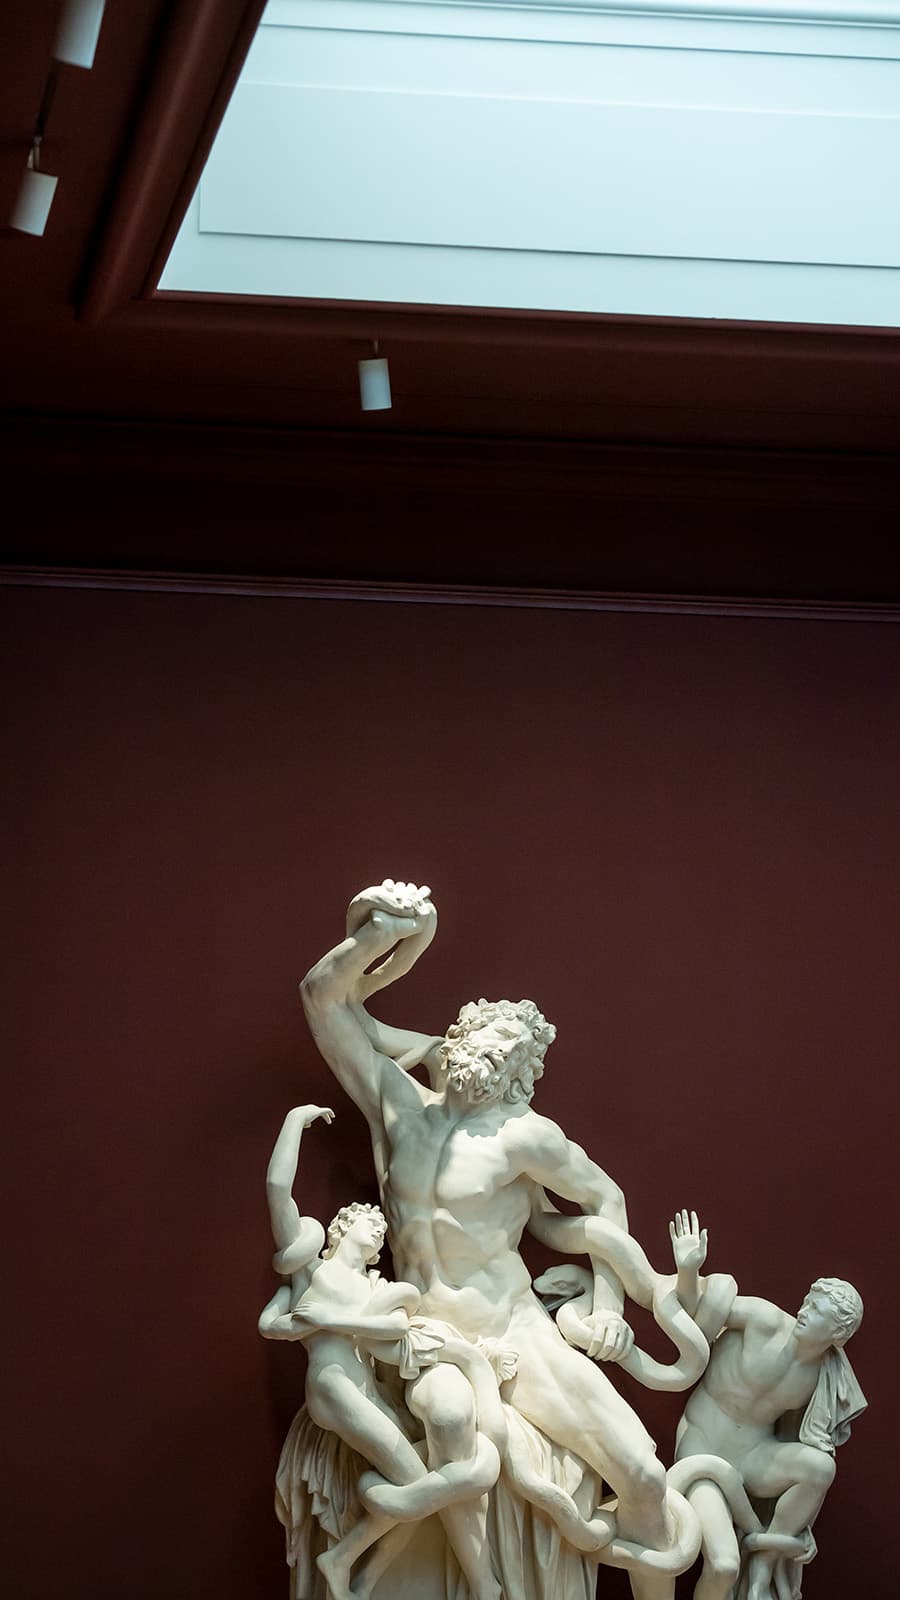 The famous Laocoön at the Vatican sculpture in the Maguire Museum